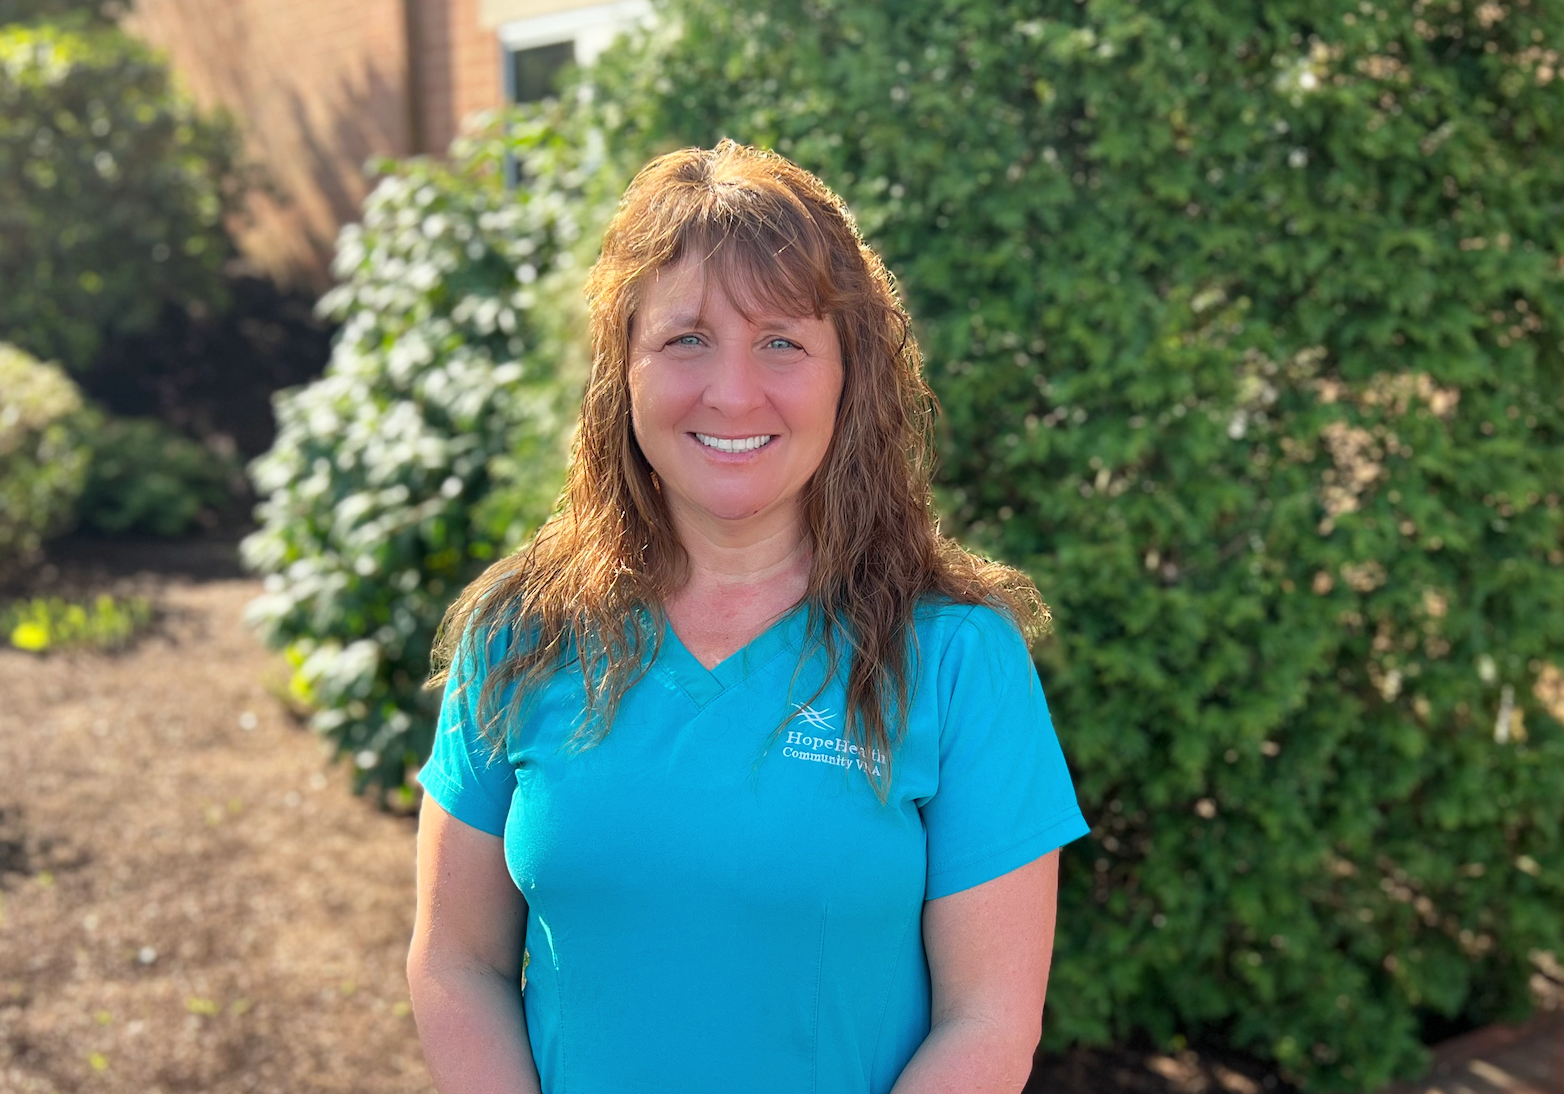 Occupational therapist in teal scrubs standing in a garden surrounded by greenery